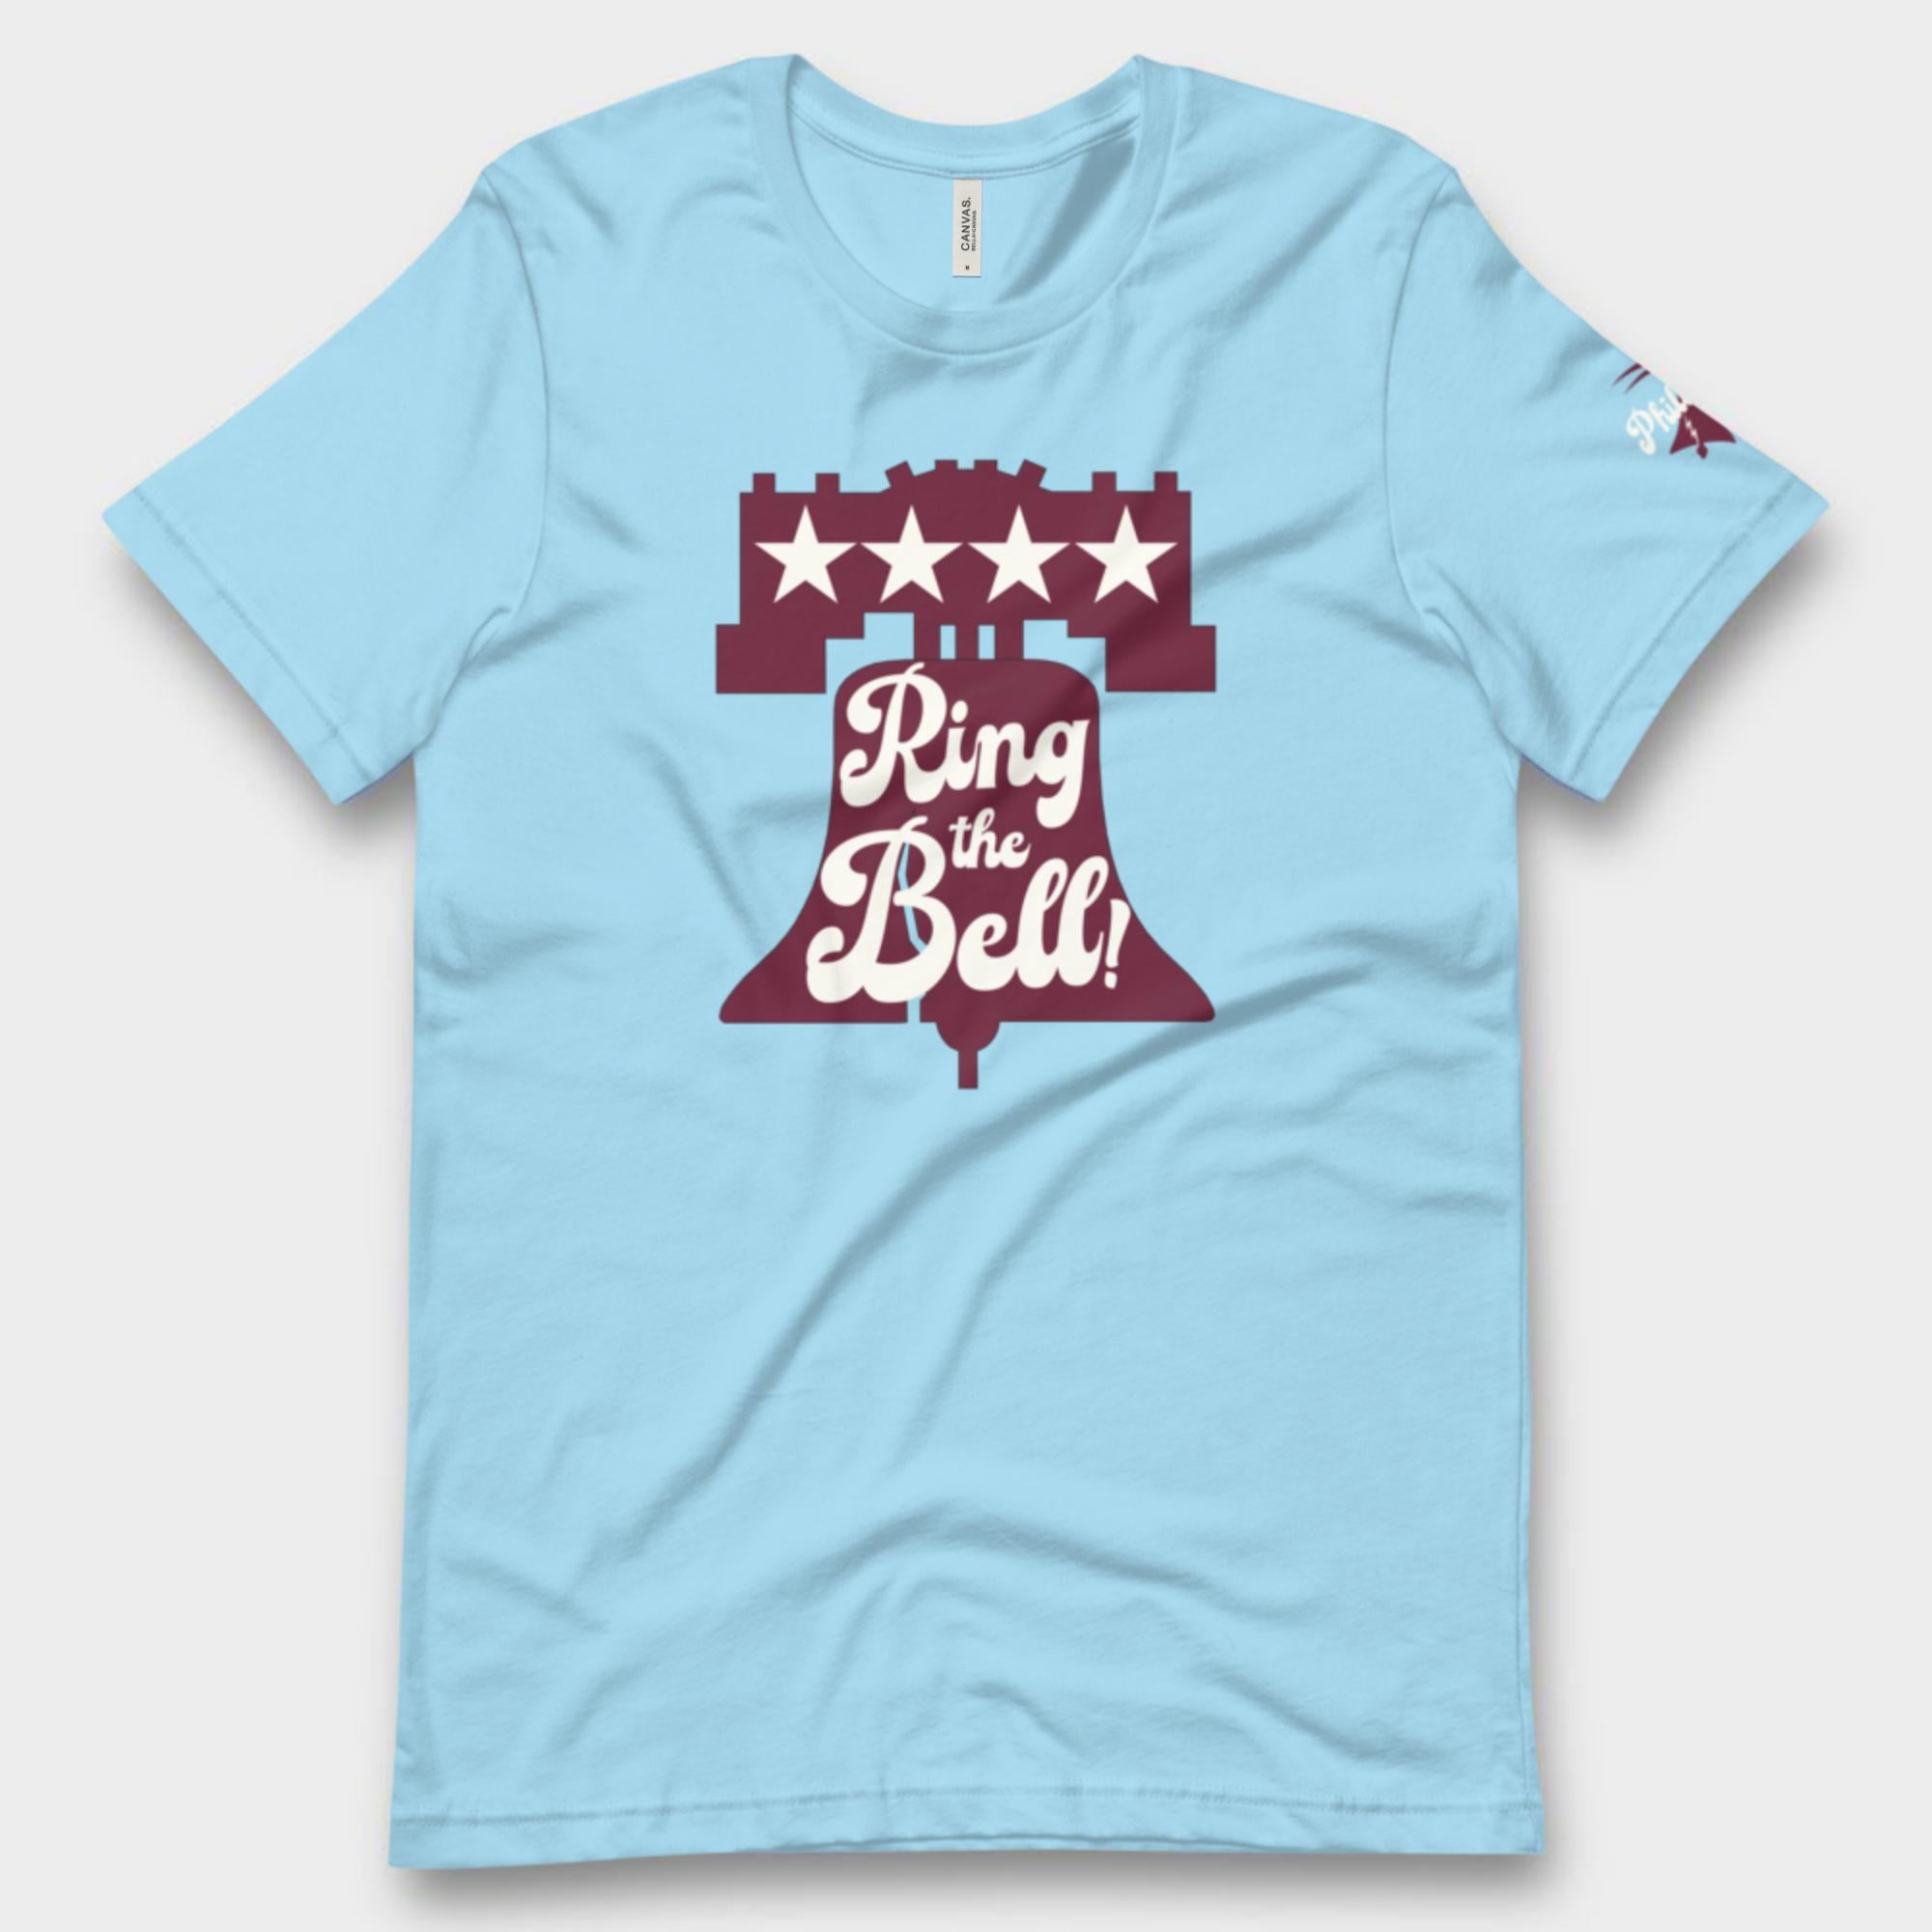 "Ring the Bell" Tee